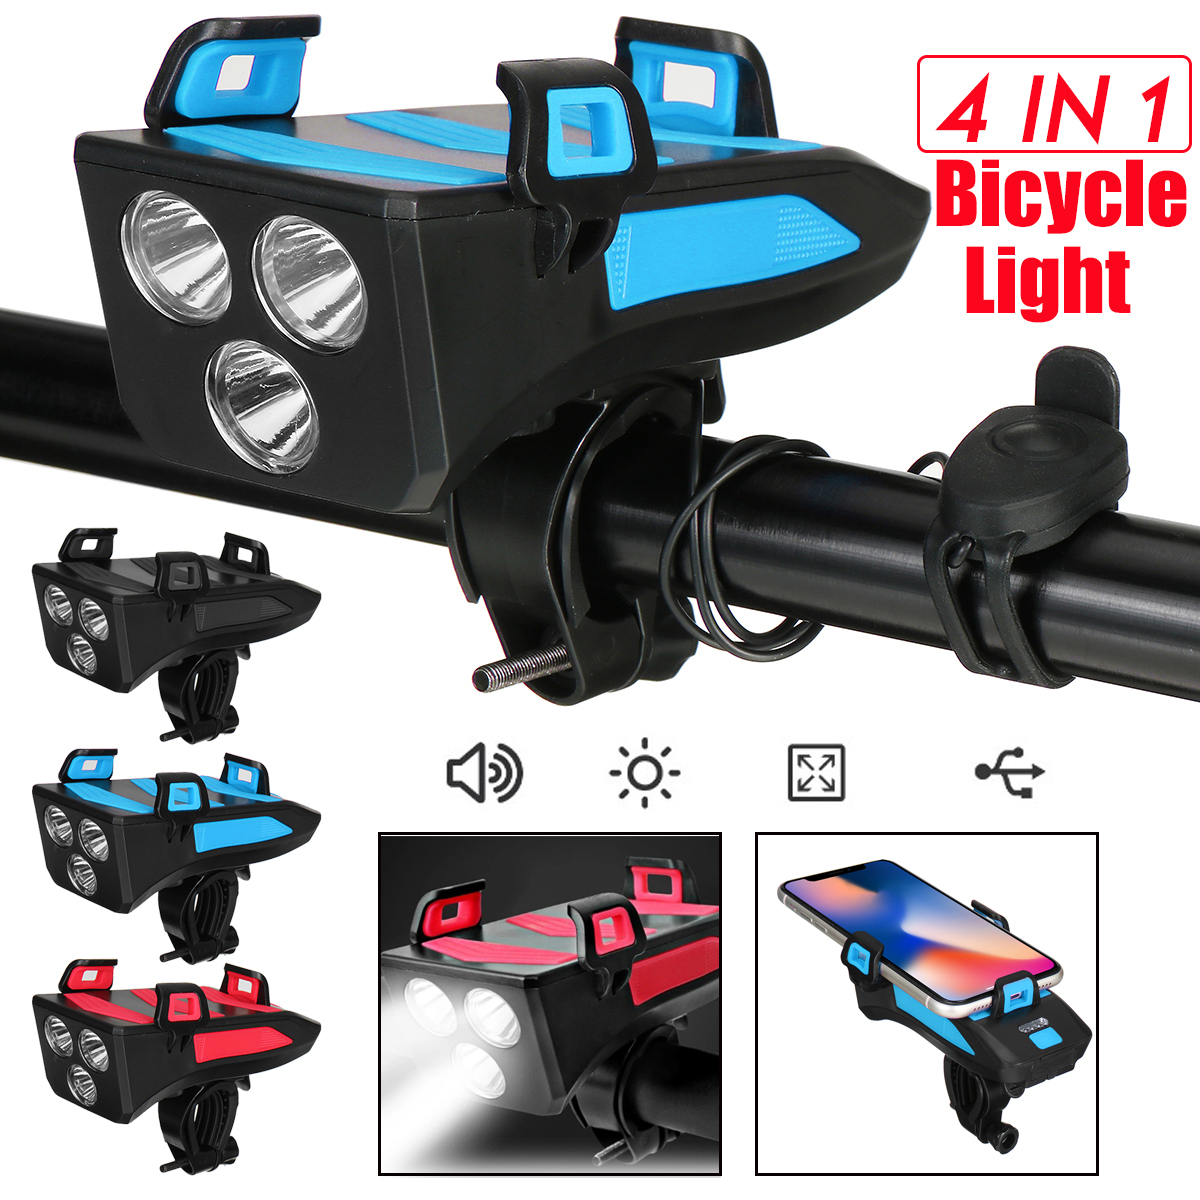 Find 4 in 1 Bike Bicycle Light Waterproof with Bike Horn Phone Holder Power Bank for Sale on Gipsybee.com with cryptocurrencies